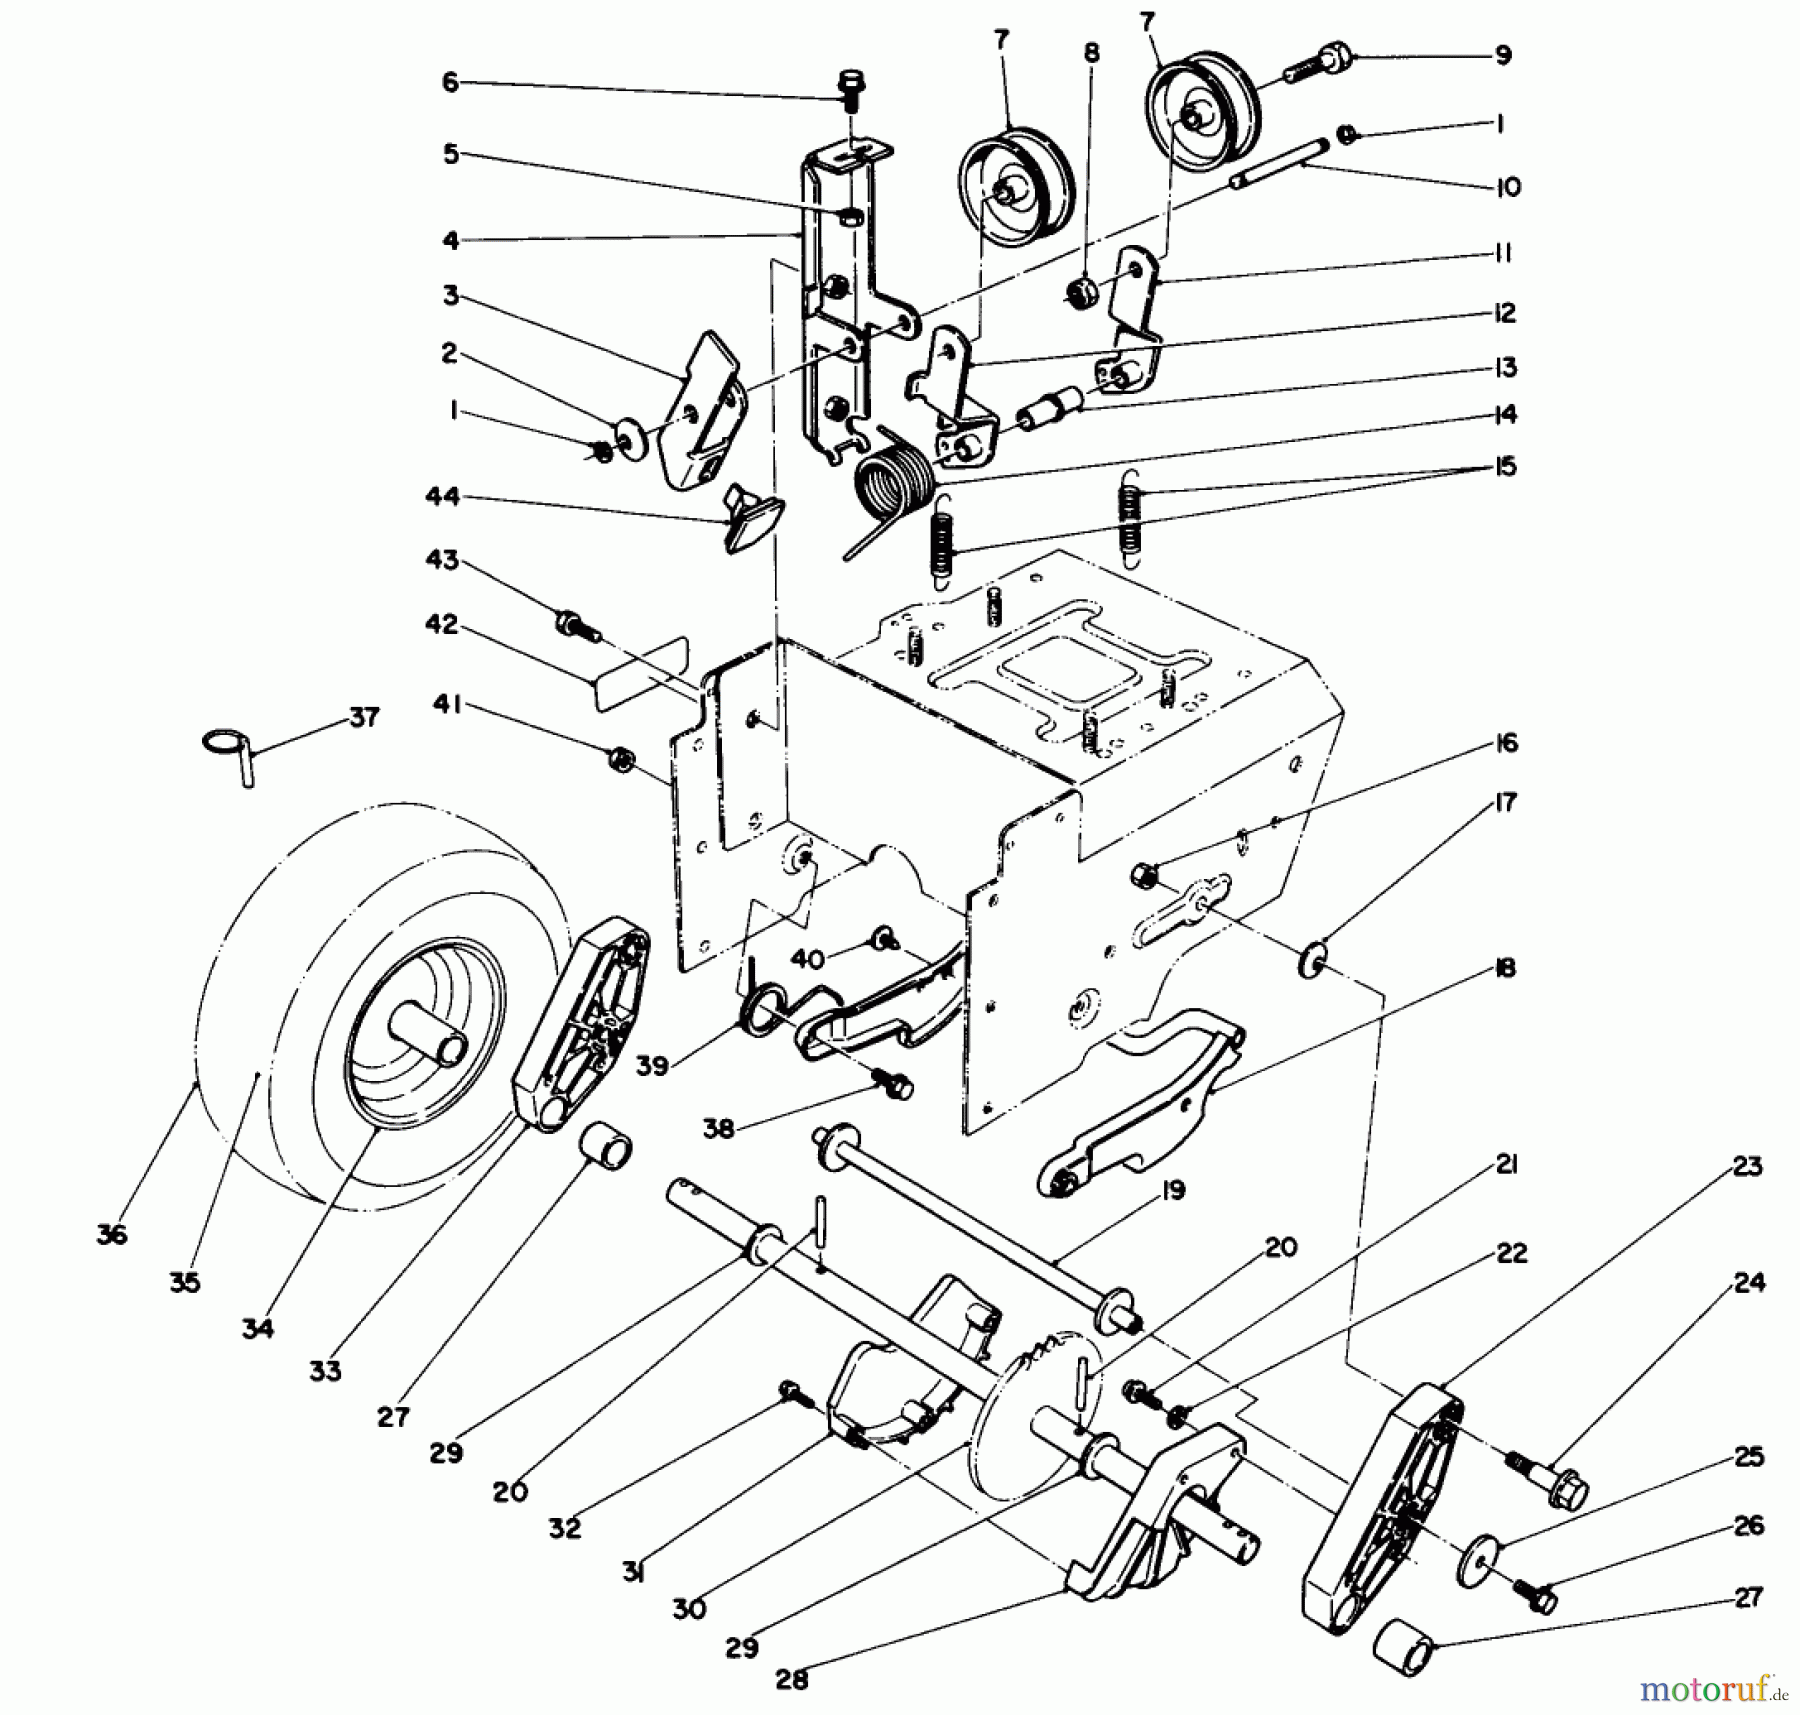  Toro Neu Snow Blowers/Snow Throwers Seite 1 38580 (1132) - Toro 1132 Power Shift Snowthrower, 1988 (8000001-8999999) TRACTION DRIVE ASSEMBLY